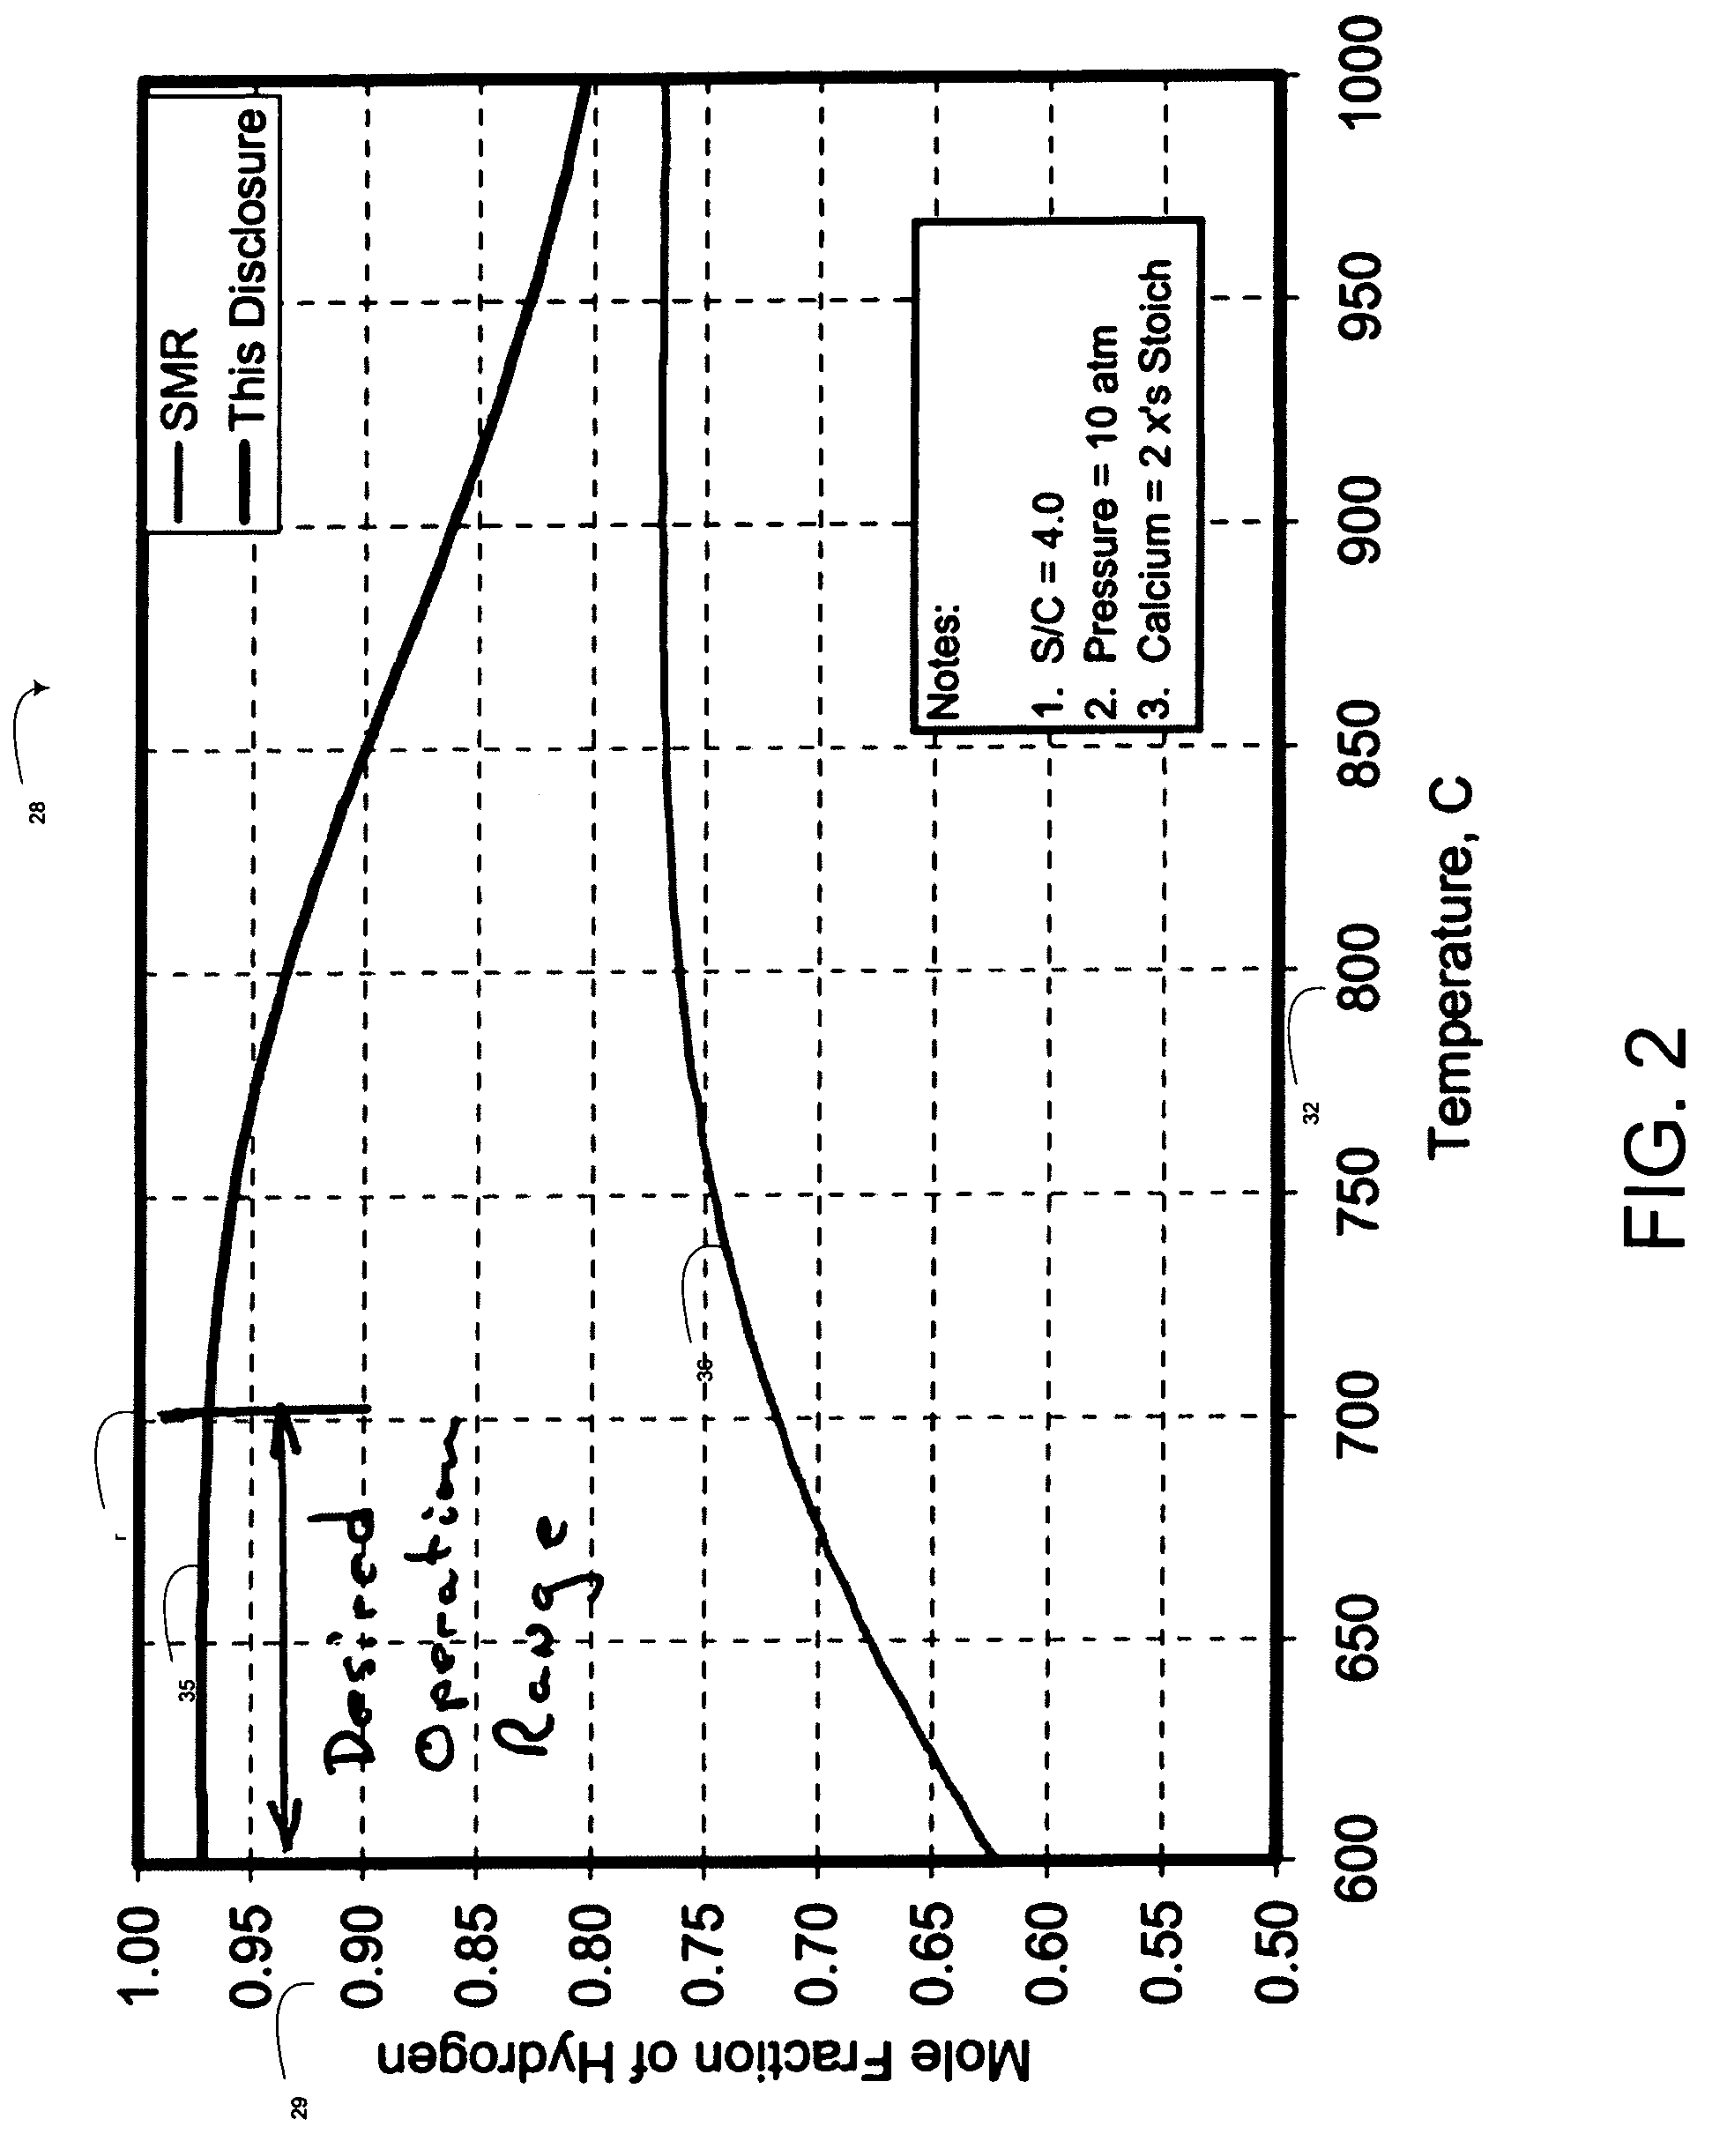 Hydrogen generation with efficient byproduct recycle